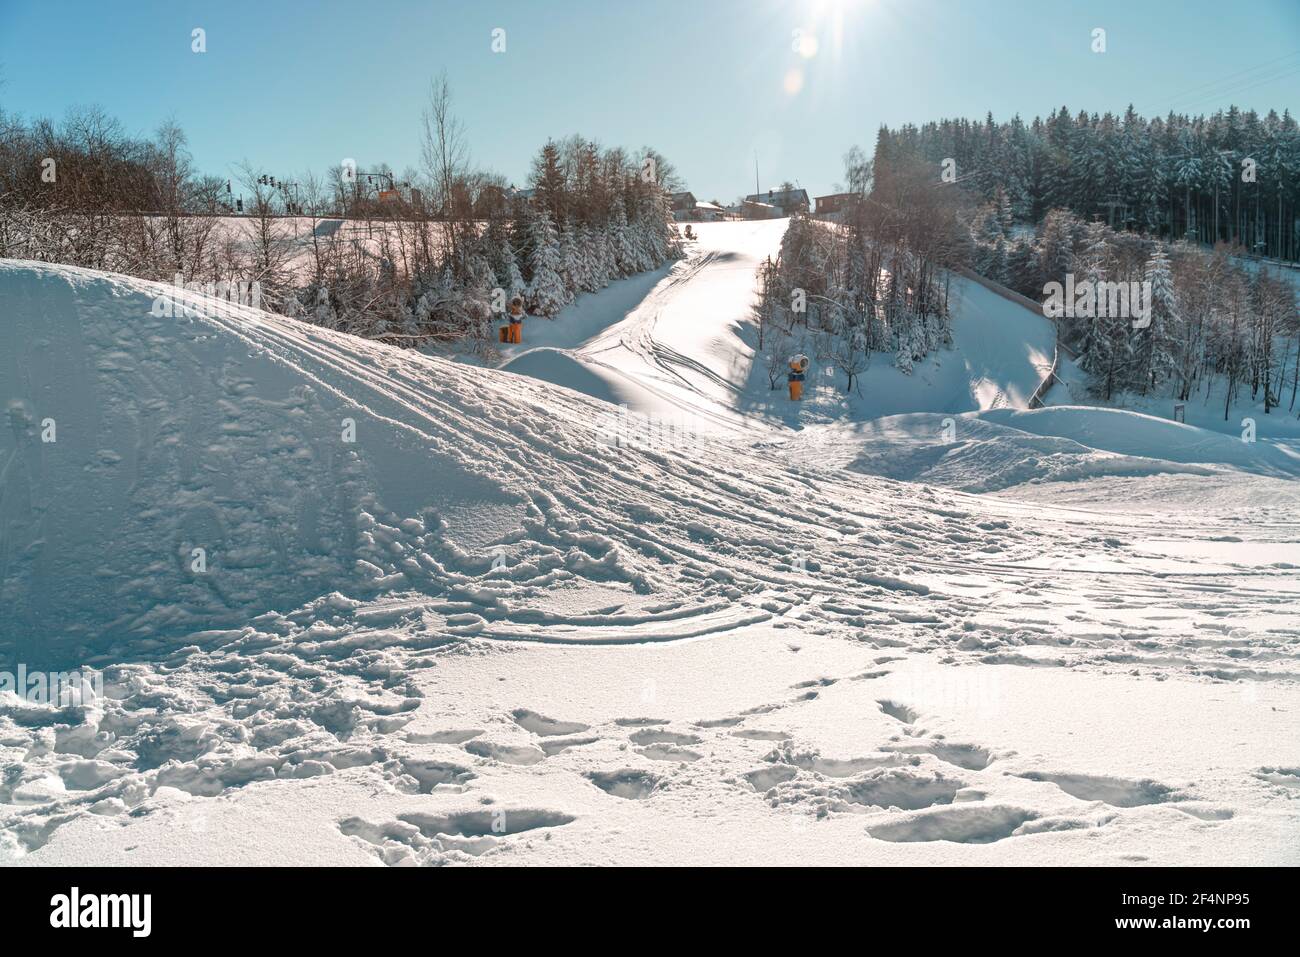 Winter sports area with snow and sunshine. Snow jumps offer possibilities for   Ski cross or snowboard cross. Winterberg, Germany Stock Photo